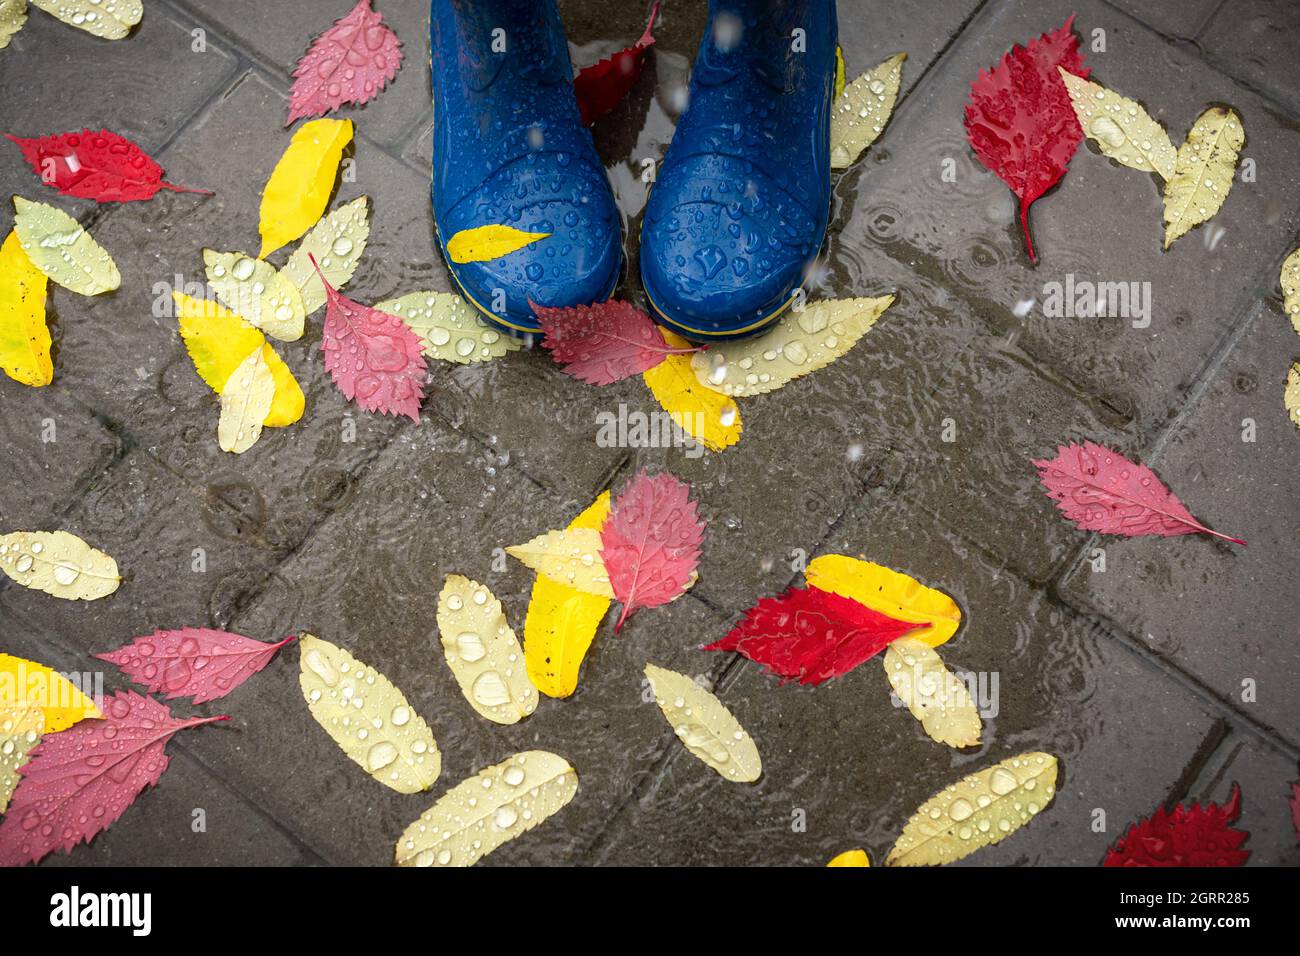 Feet in blue rubber boots standing in a wet concrete paving with autumn leaves in rain with umbrella shade. Autumn fall concept Stock Photo